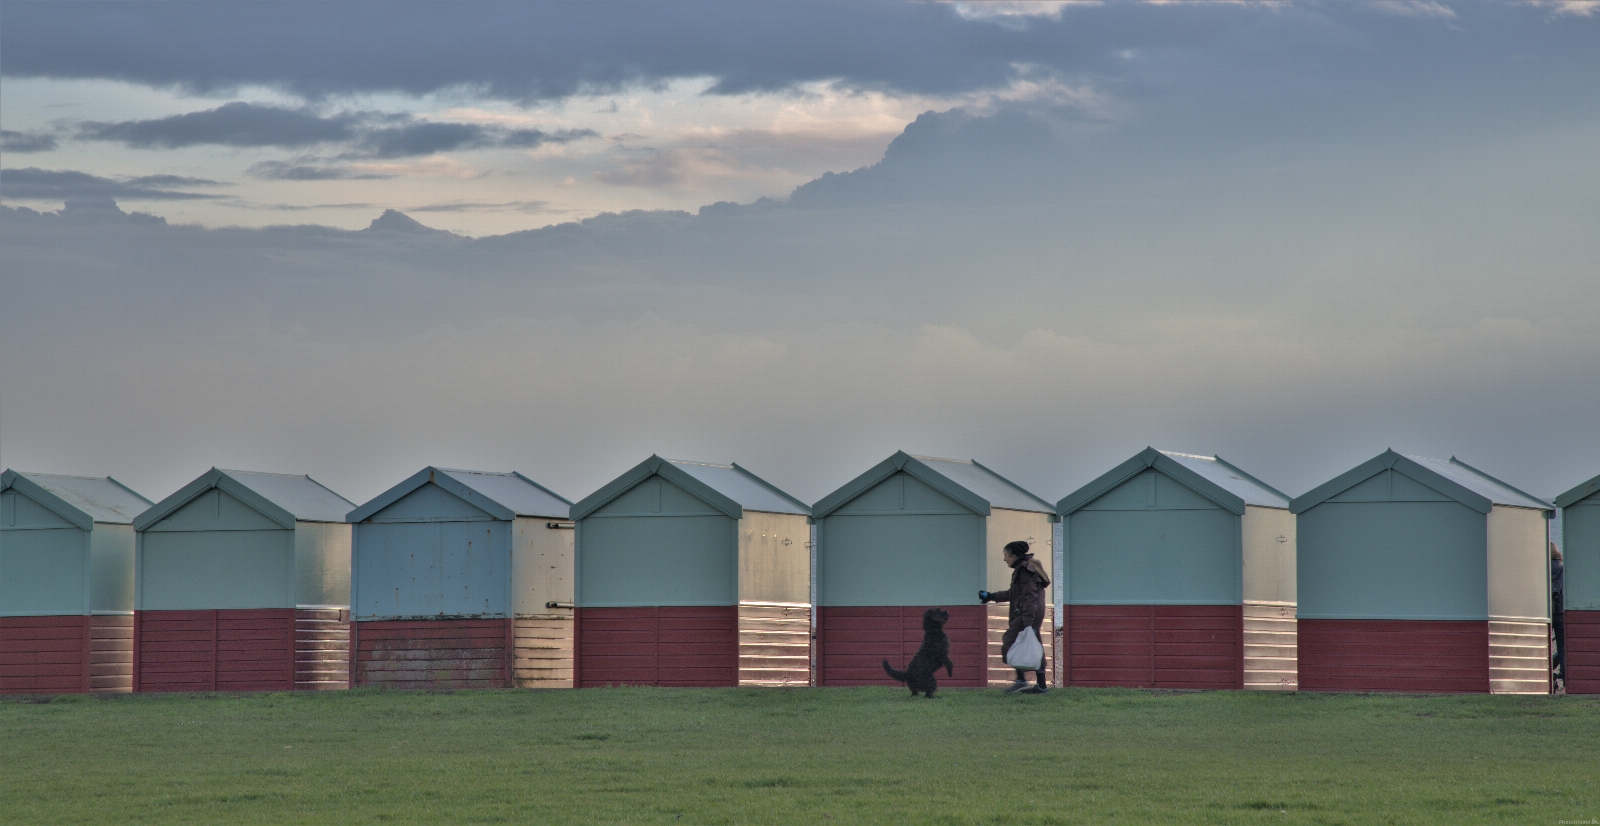 Image of Beach huts in Hove by michael bennett